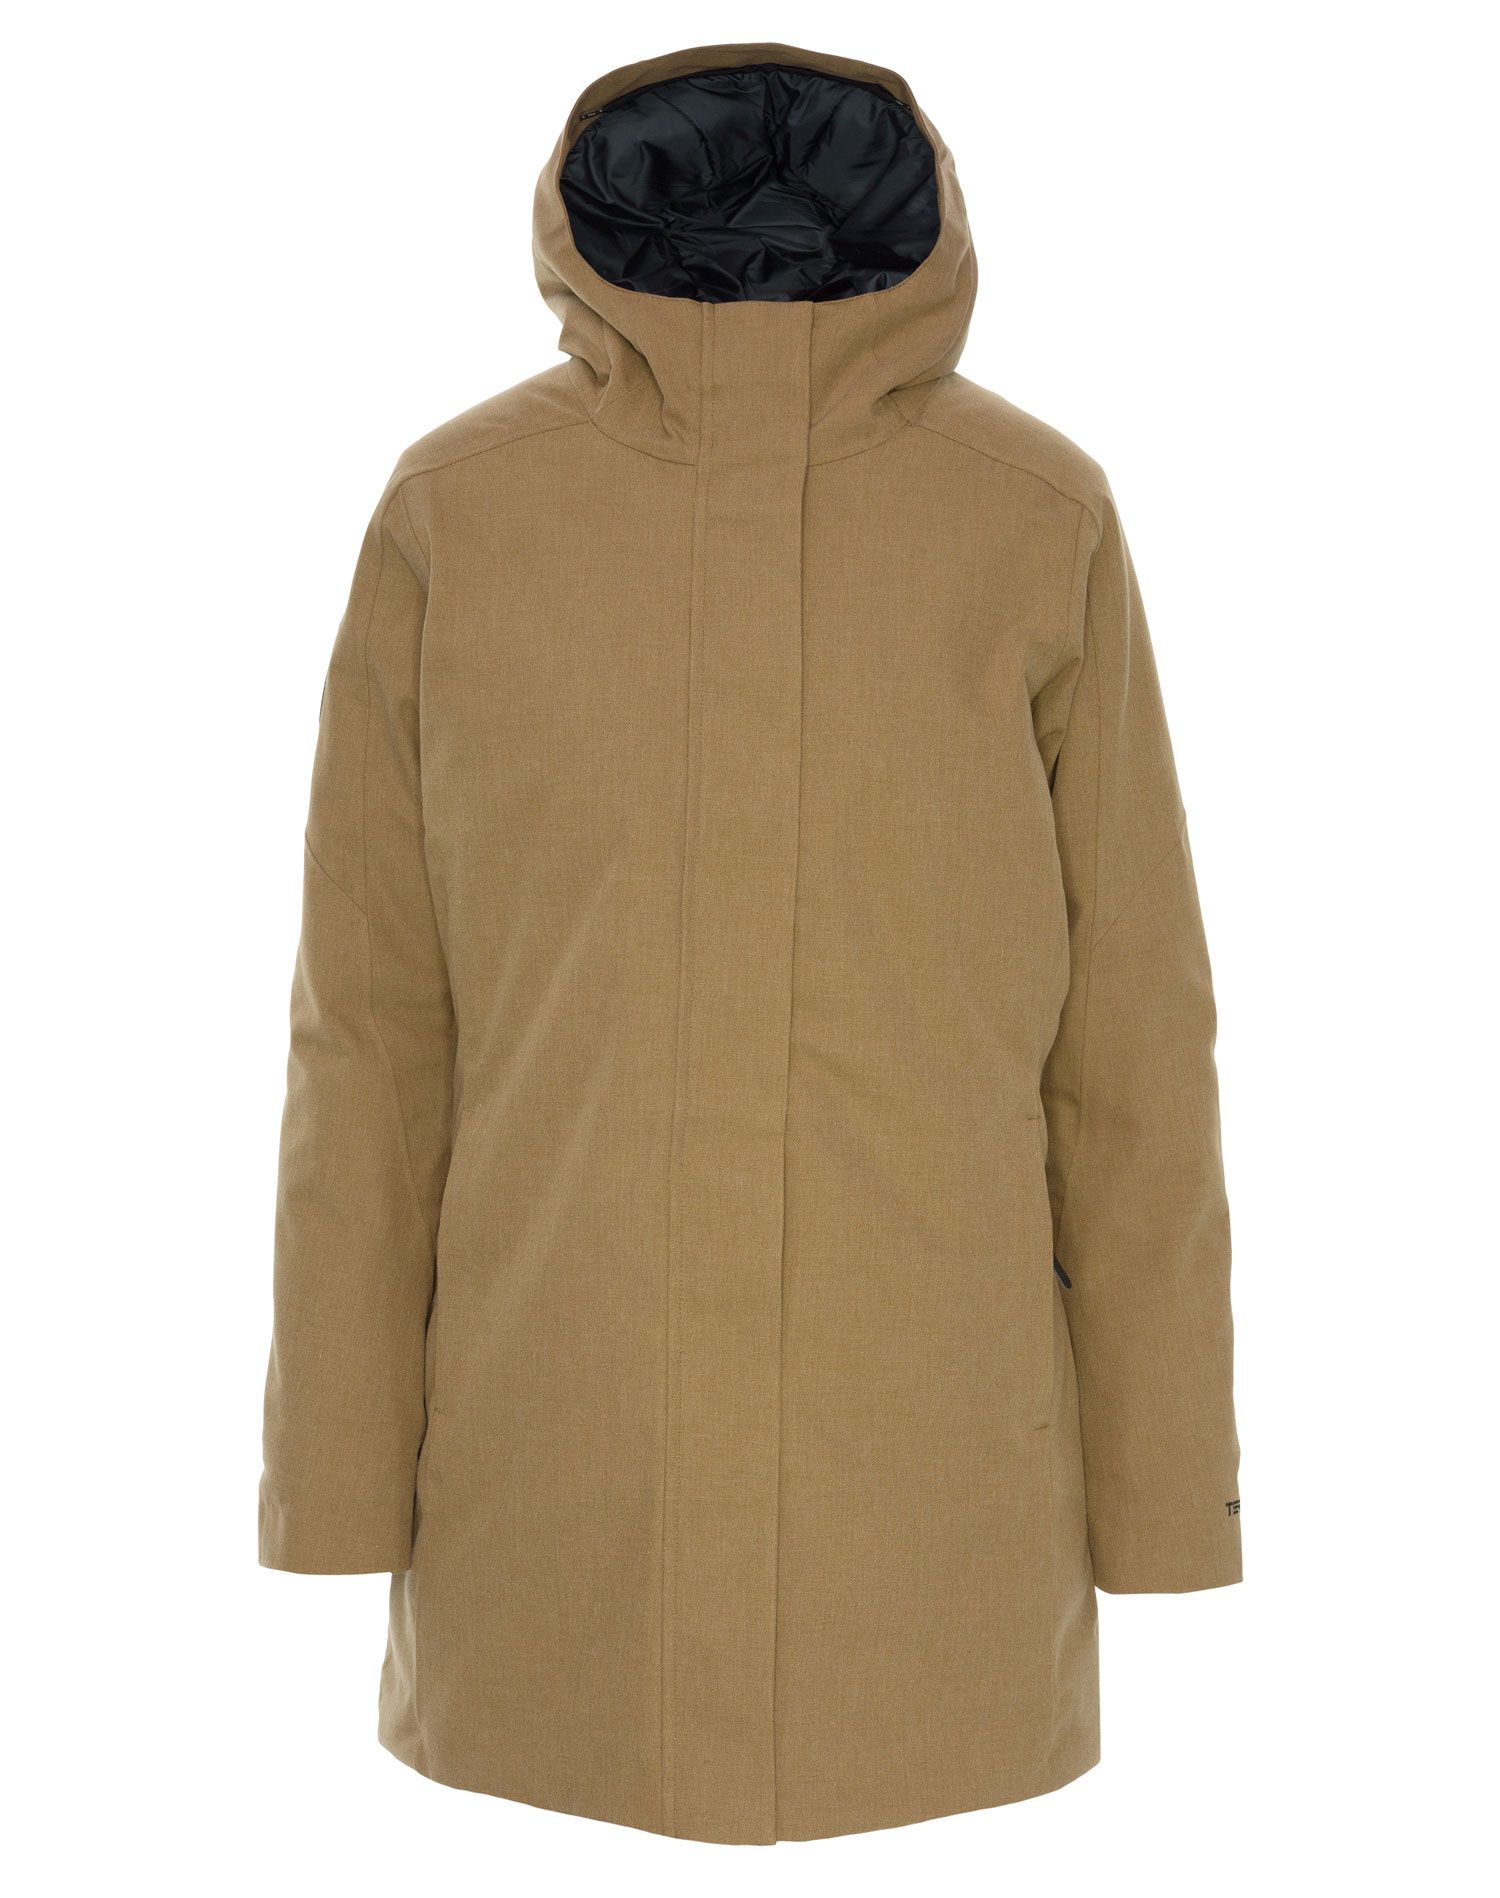 Ternua - Fresh Water Jacket - Giacca invernale - Donna